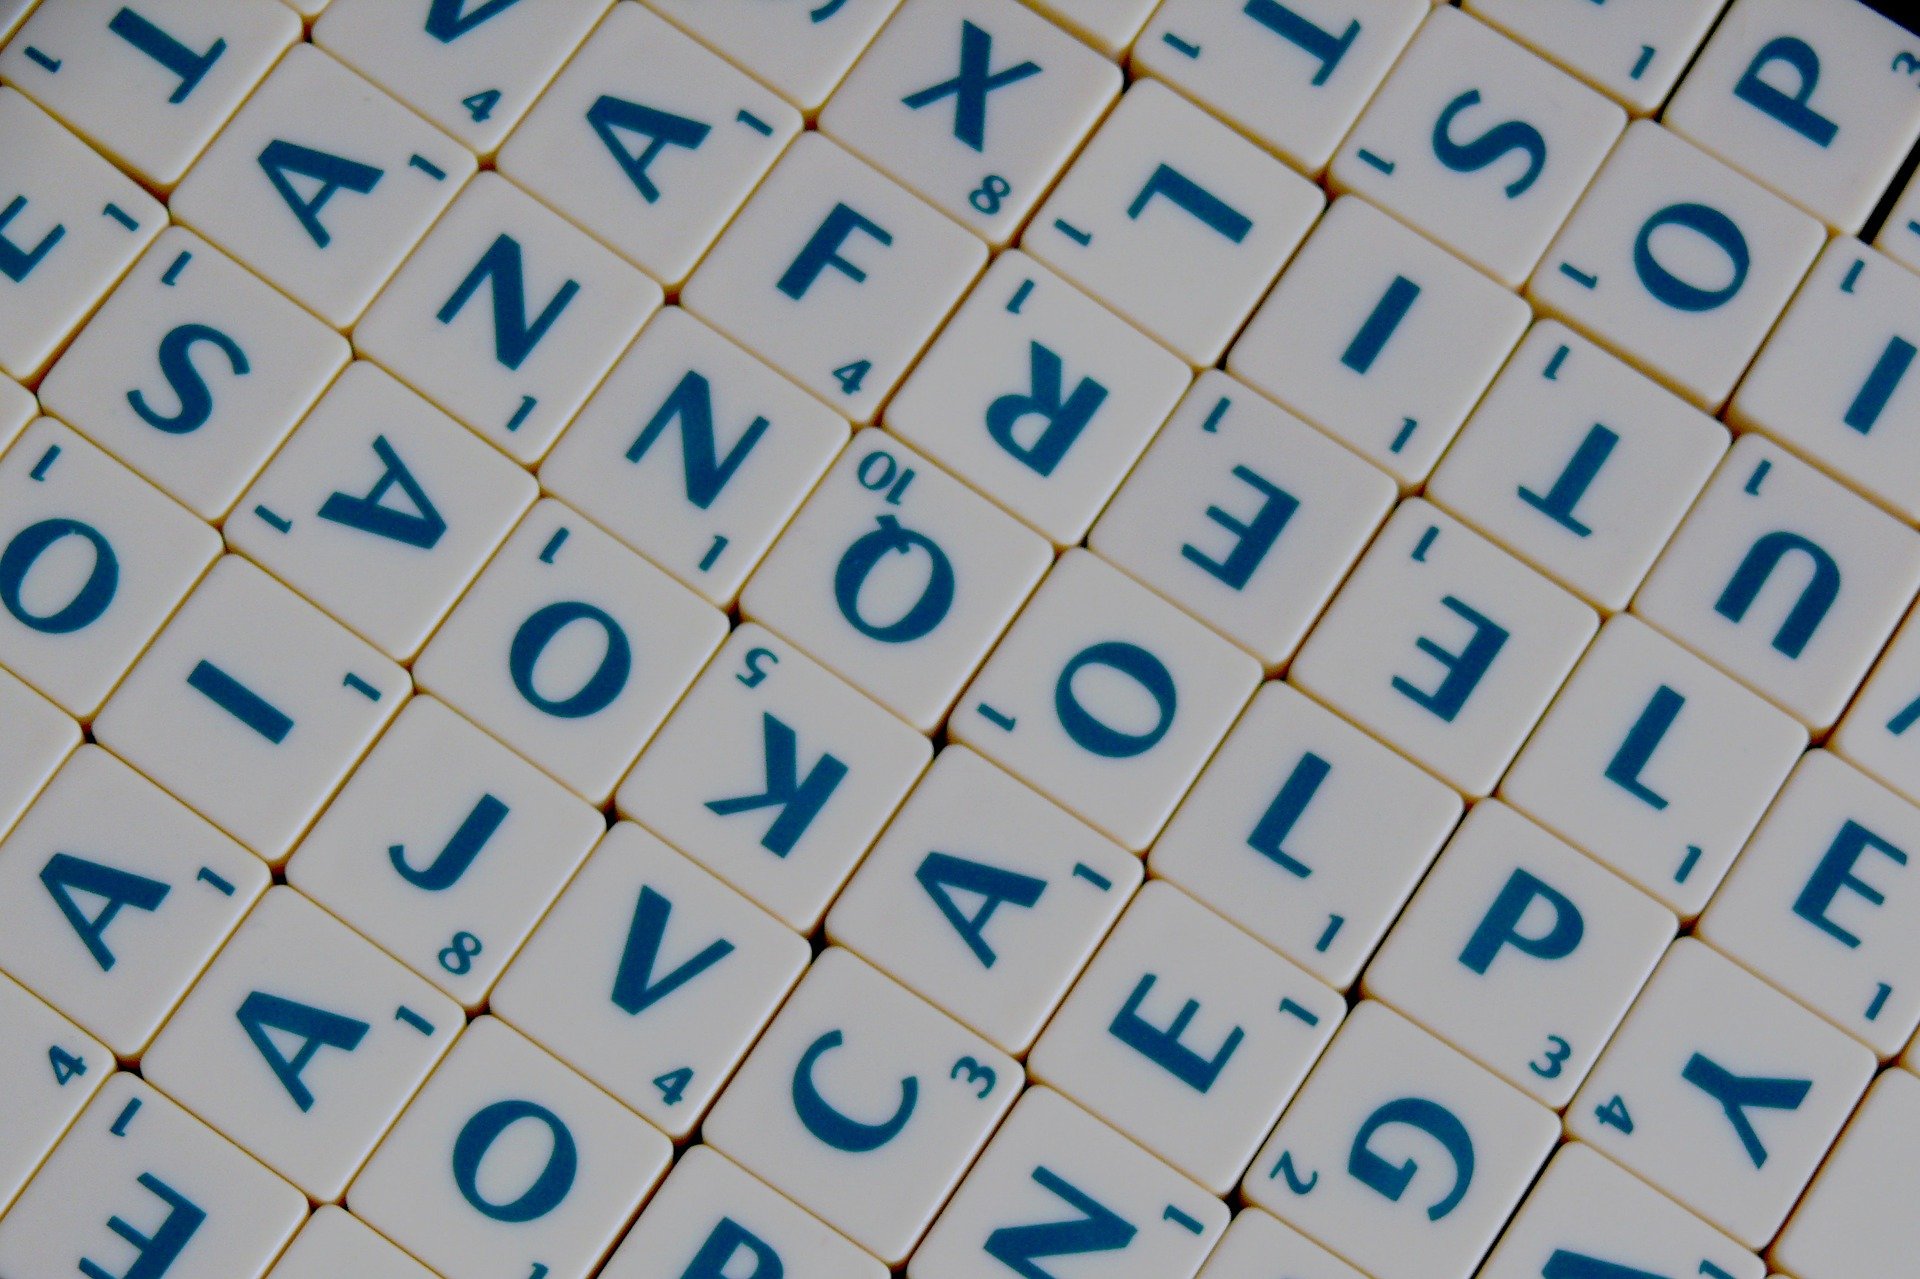 Scrabble letters pictured. | Source: Pixabay.